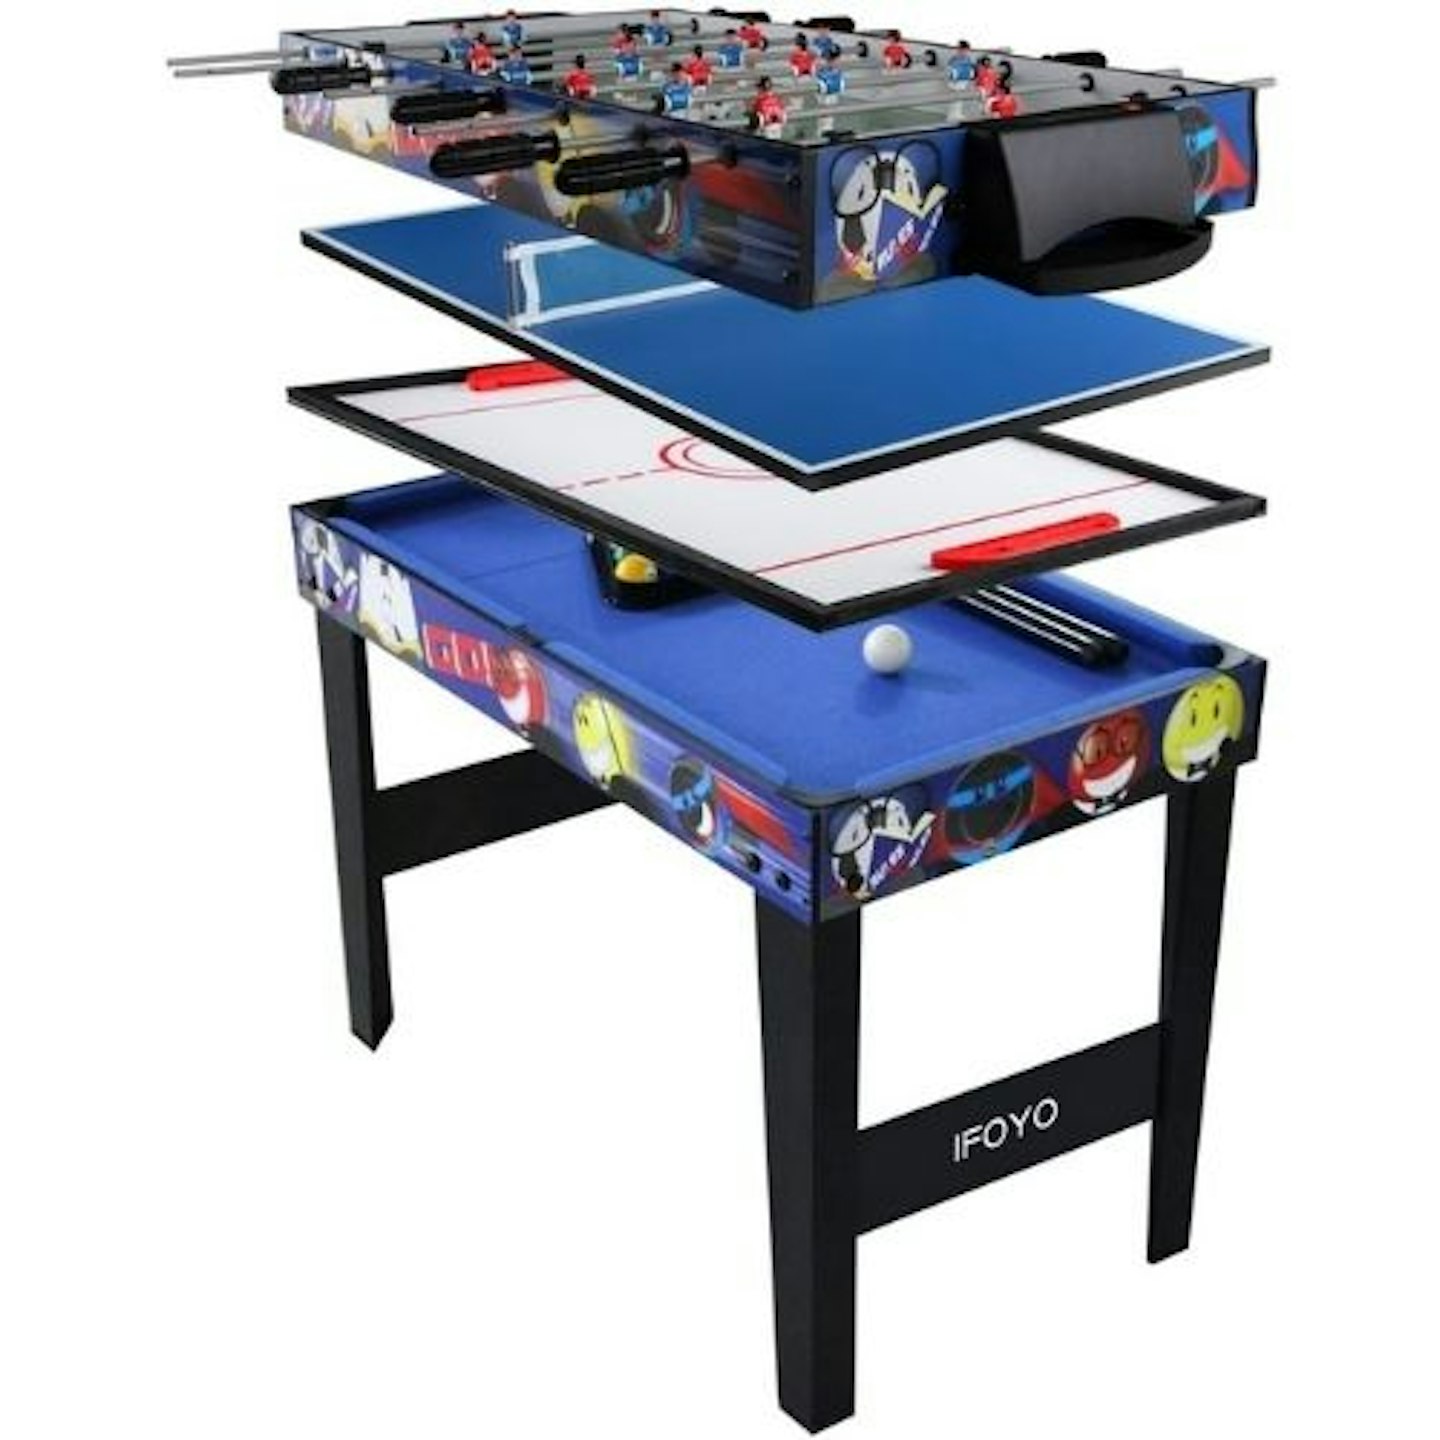 IFOYO Multi-function 4 in 1 Game Table